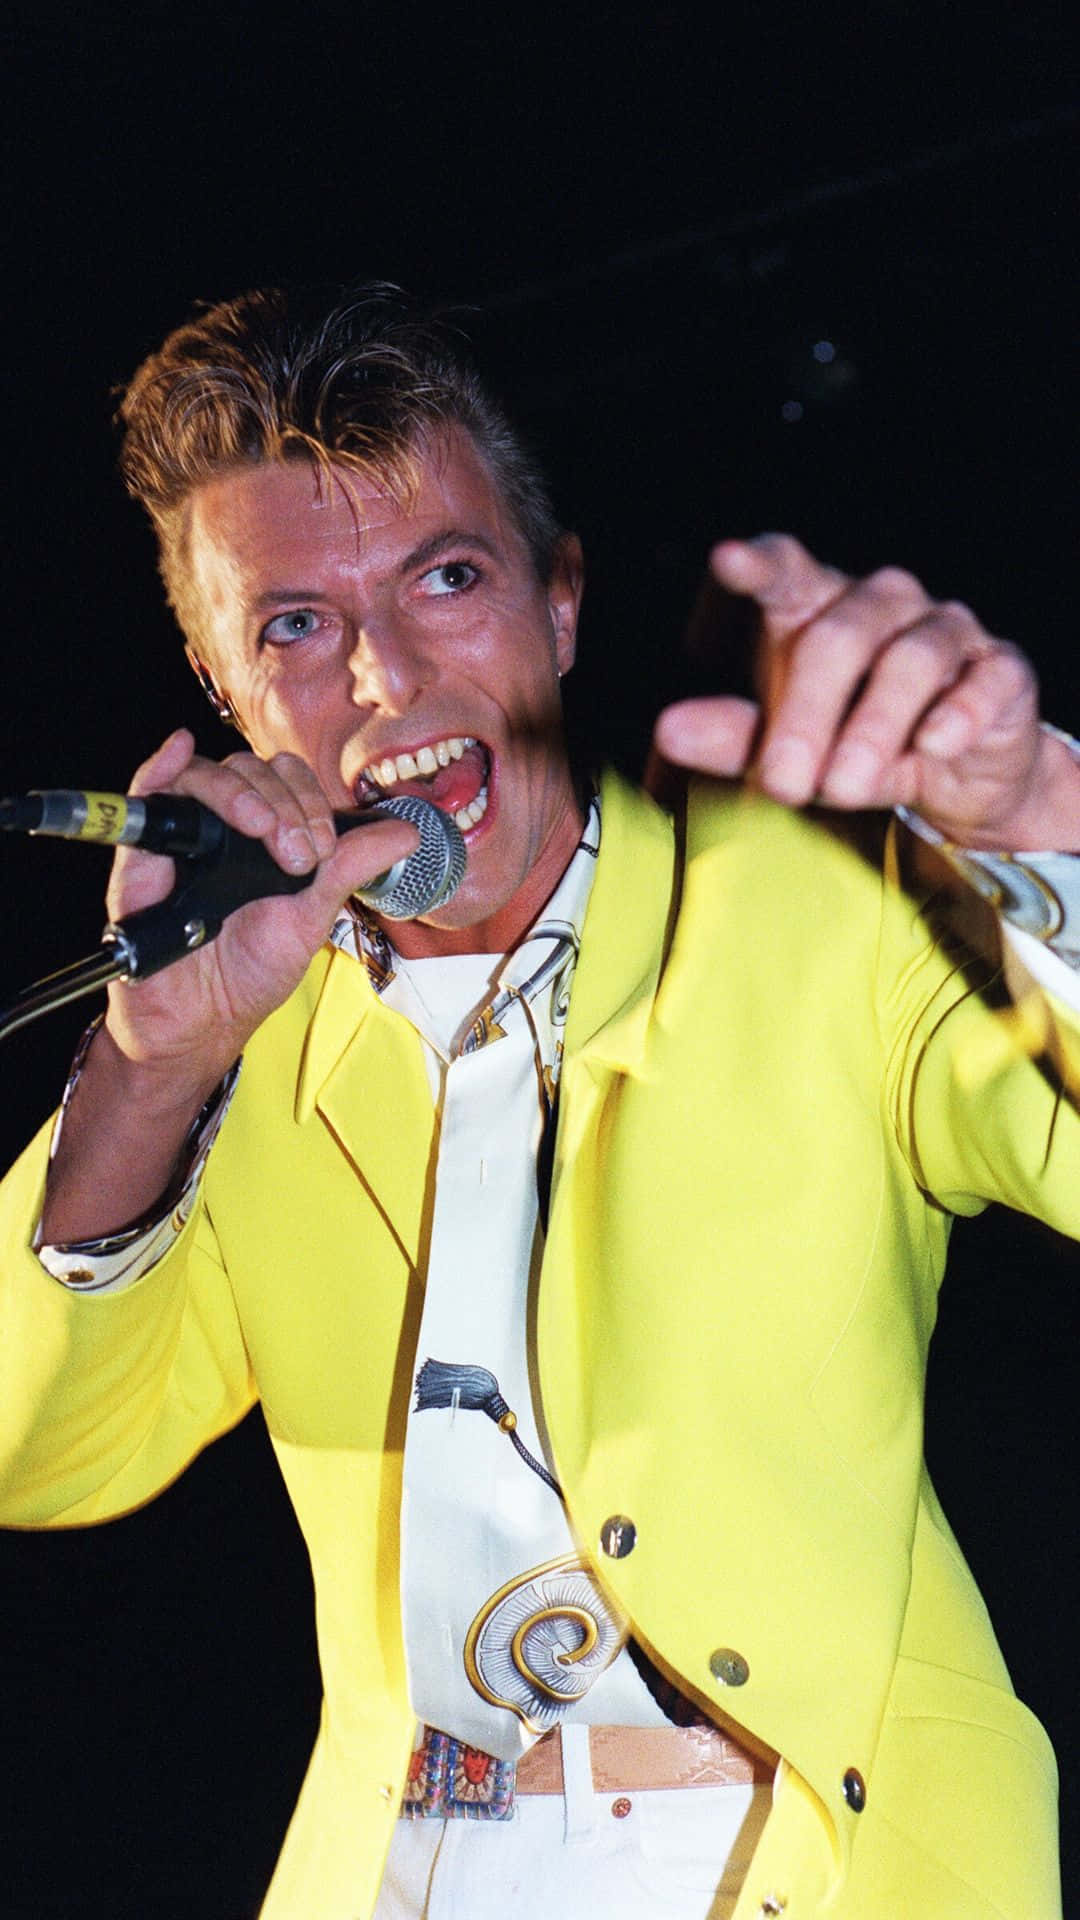 David Bowie In A Yellow Suit Singing Into A Microphone